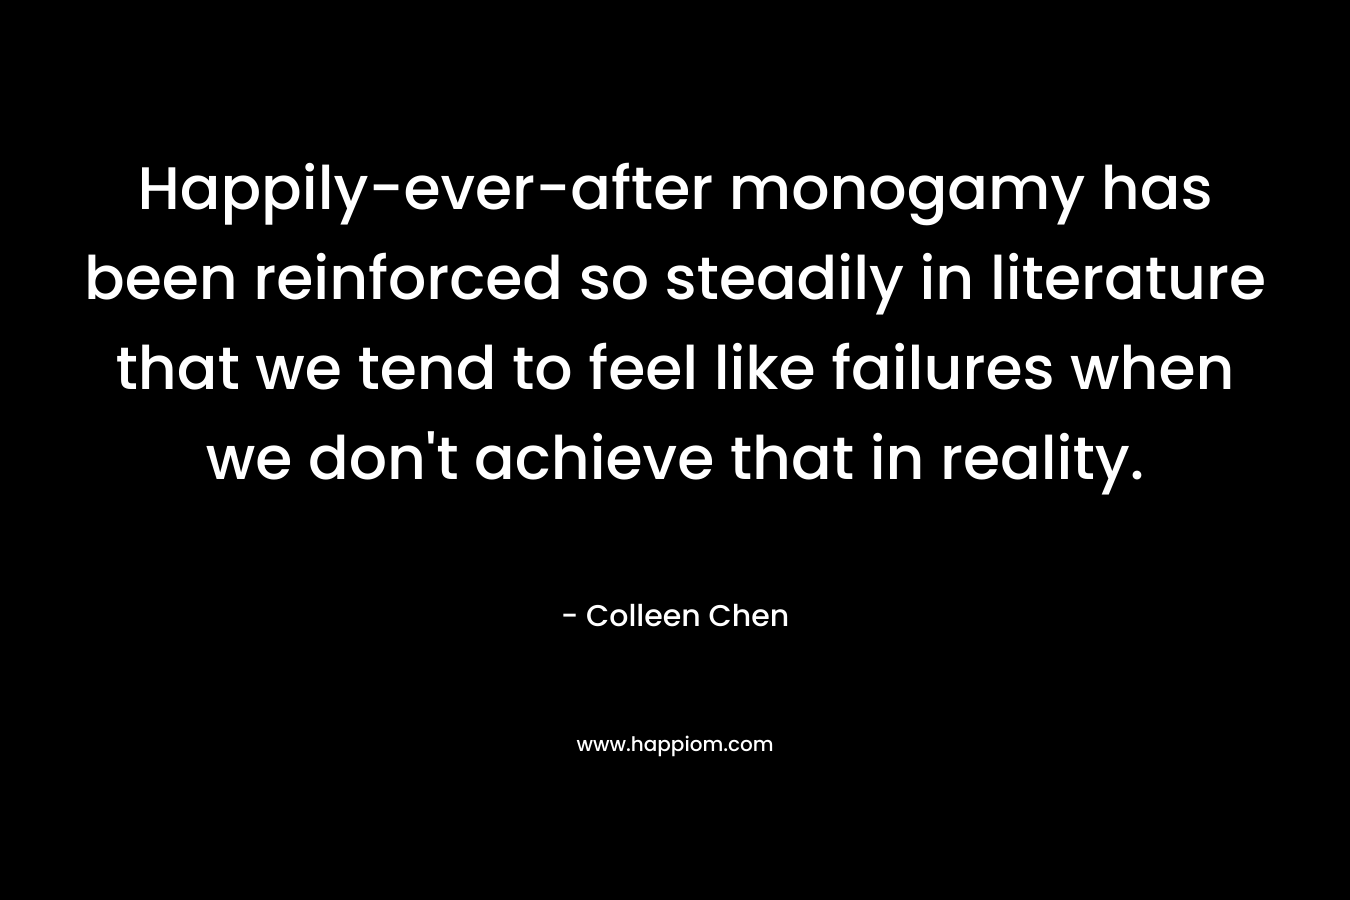 Happily-ever-after monogamy has been reinforced so steadily in literature that we tend to feel like failures when we don't achieve that in reality.